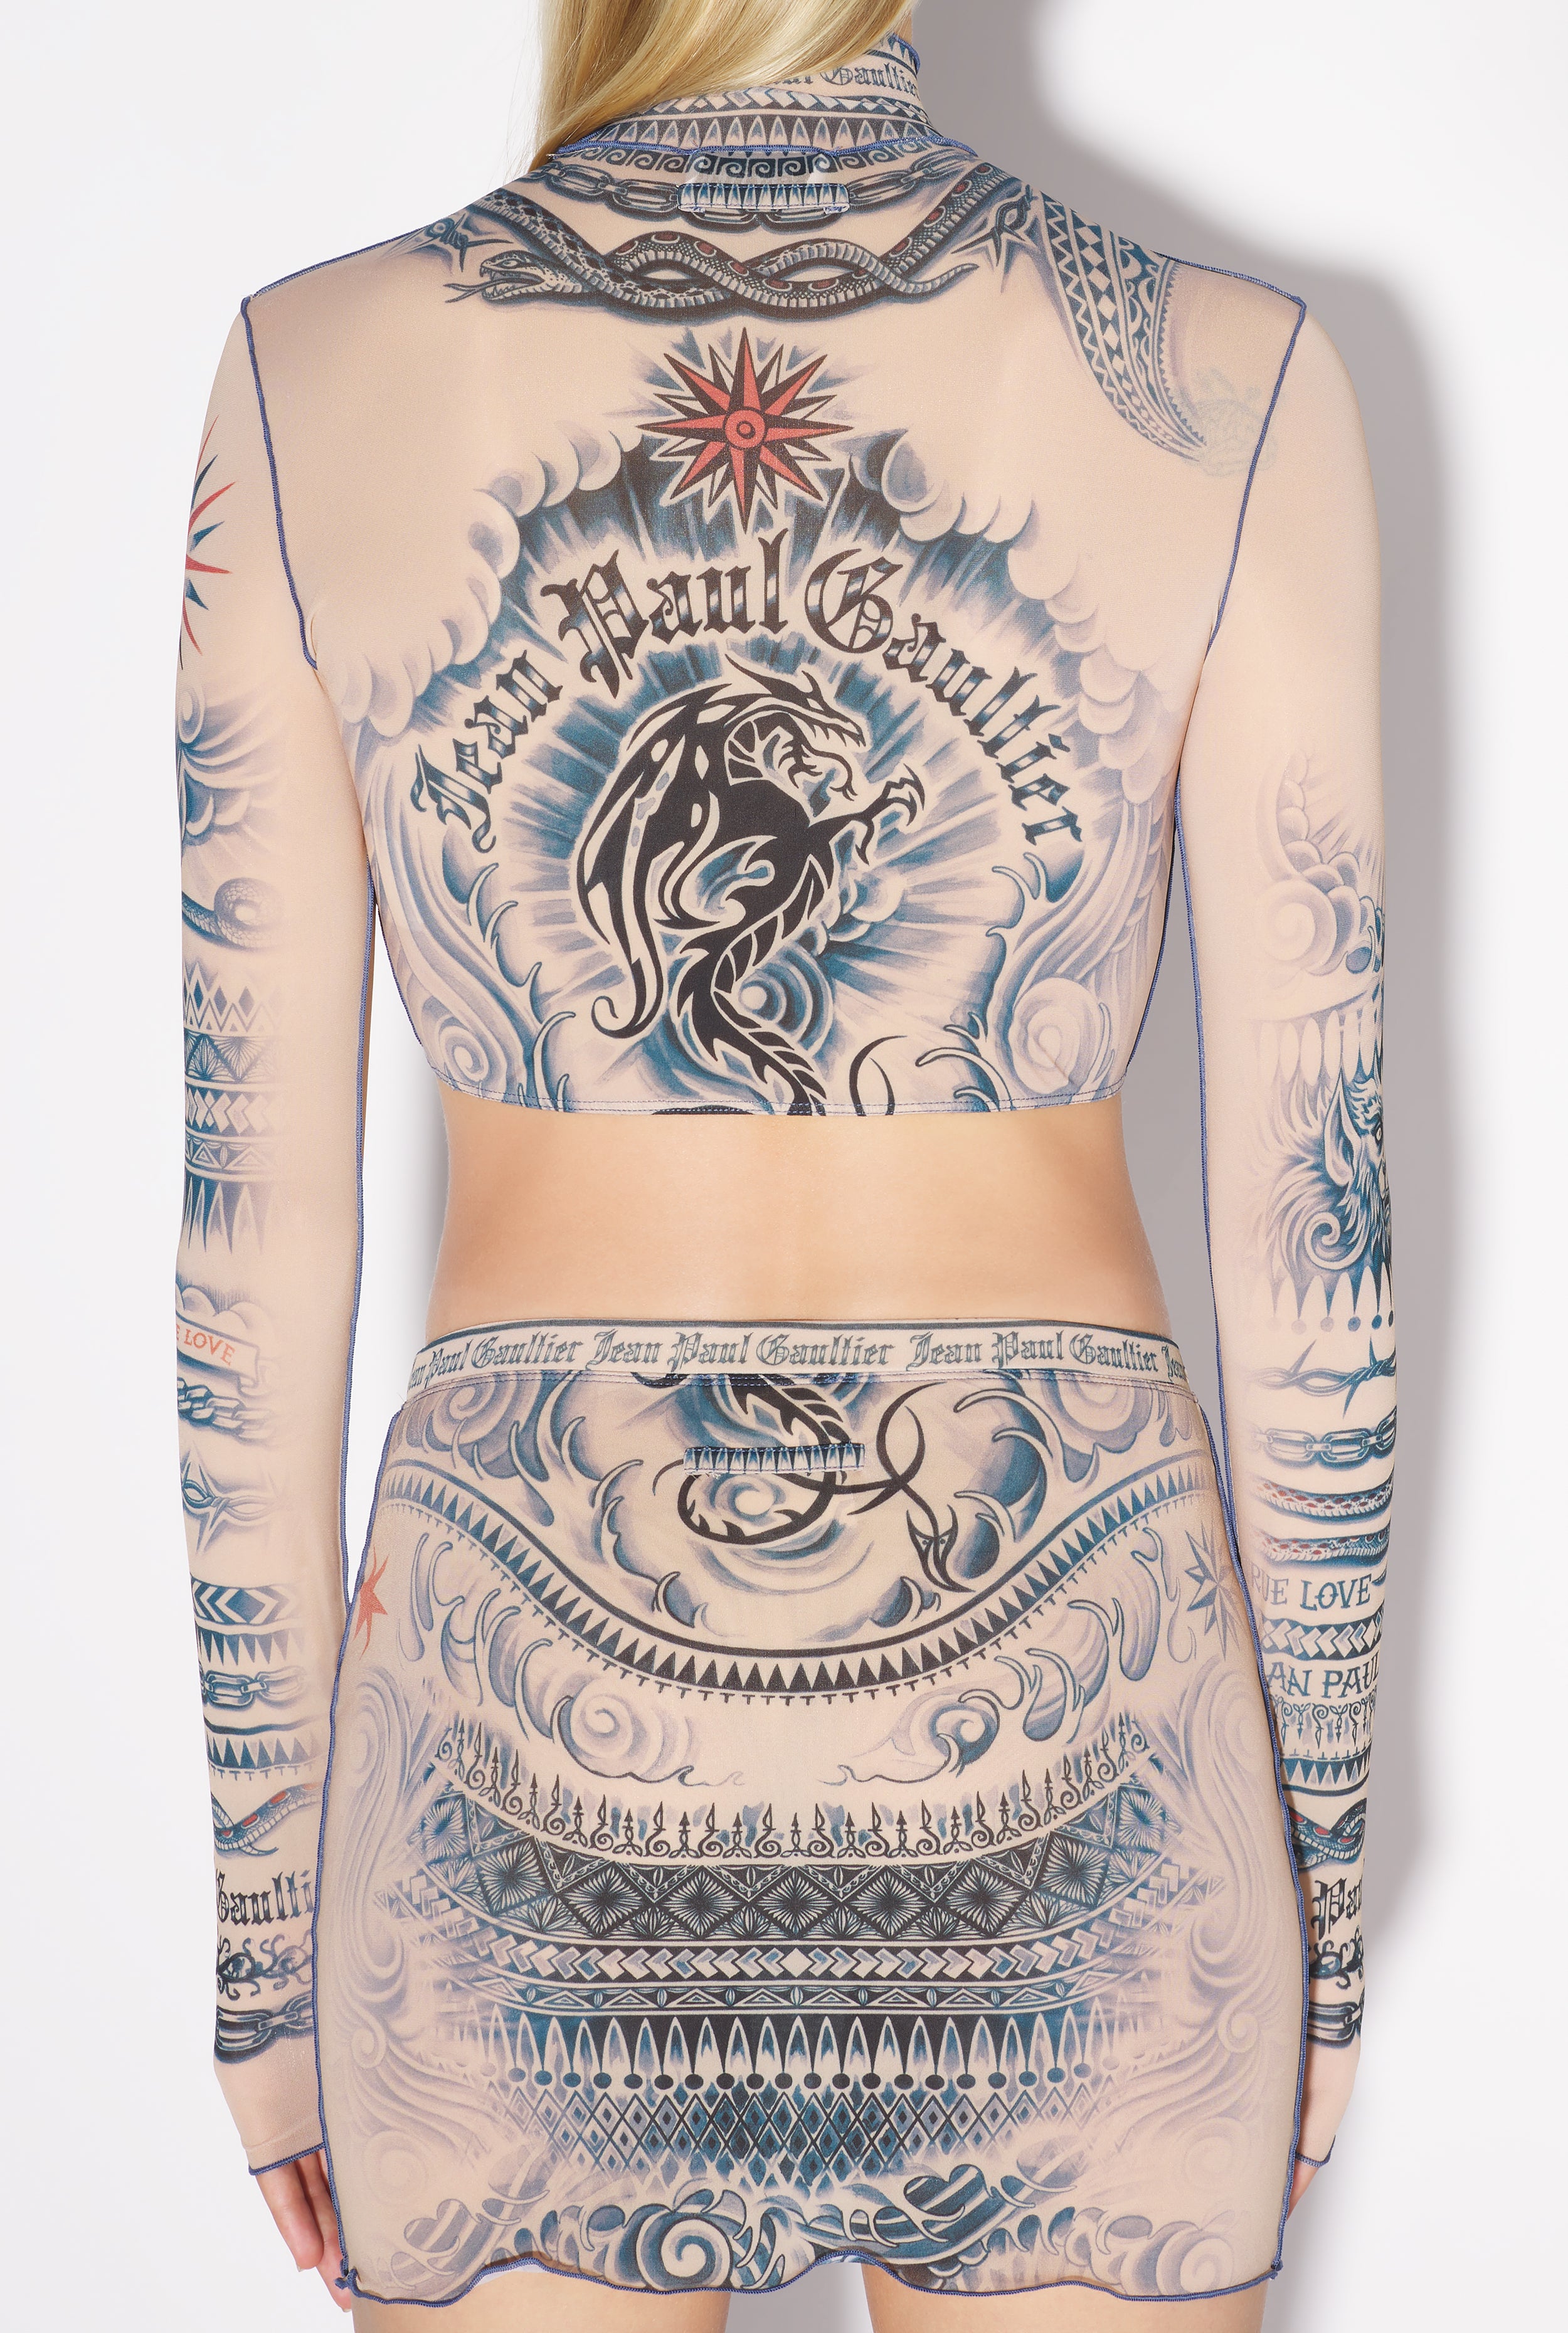 Tattoos, illusions, and men in skirts: Jean Paul Gaultier's fashion legacy